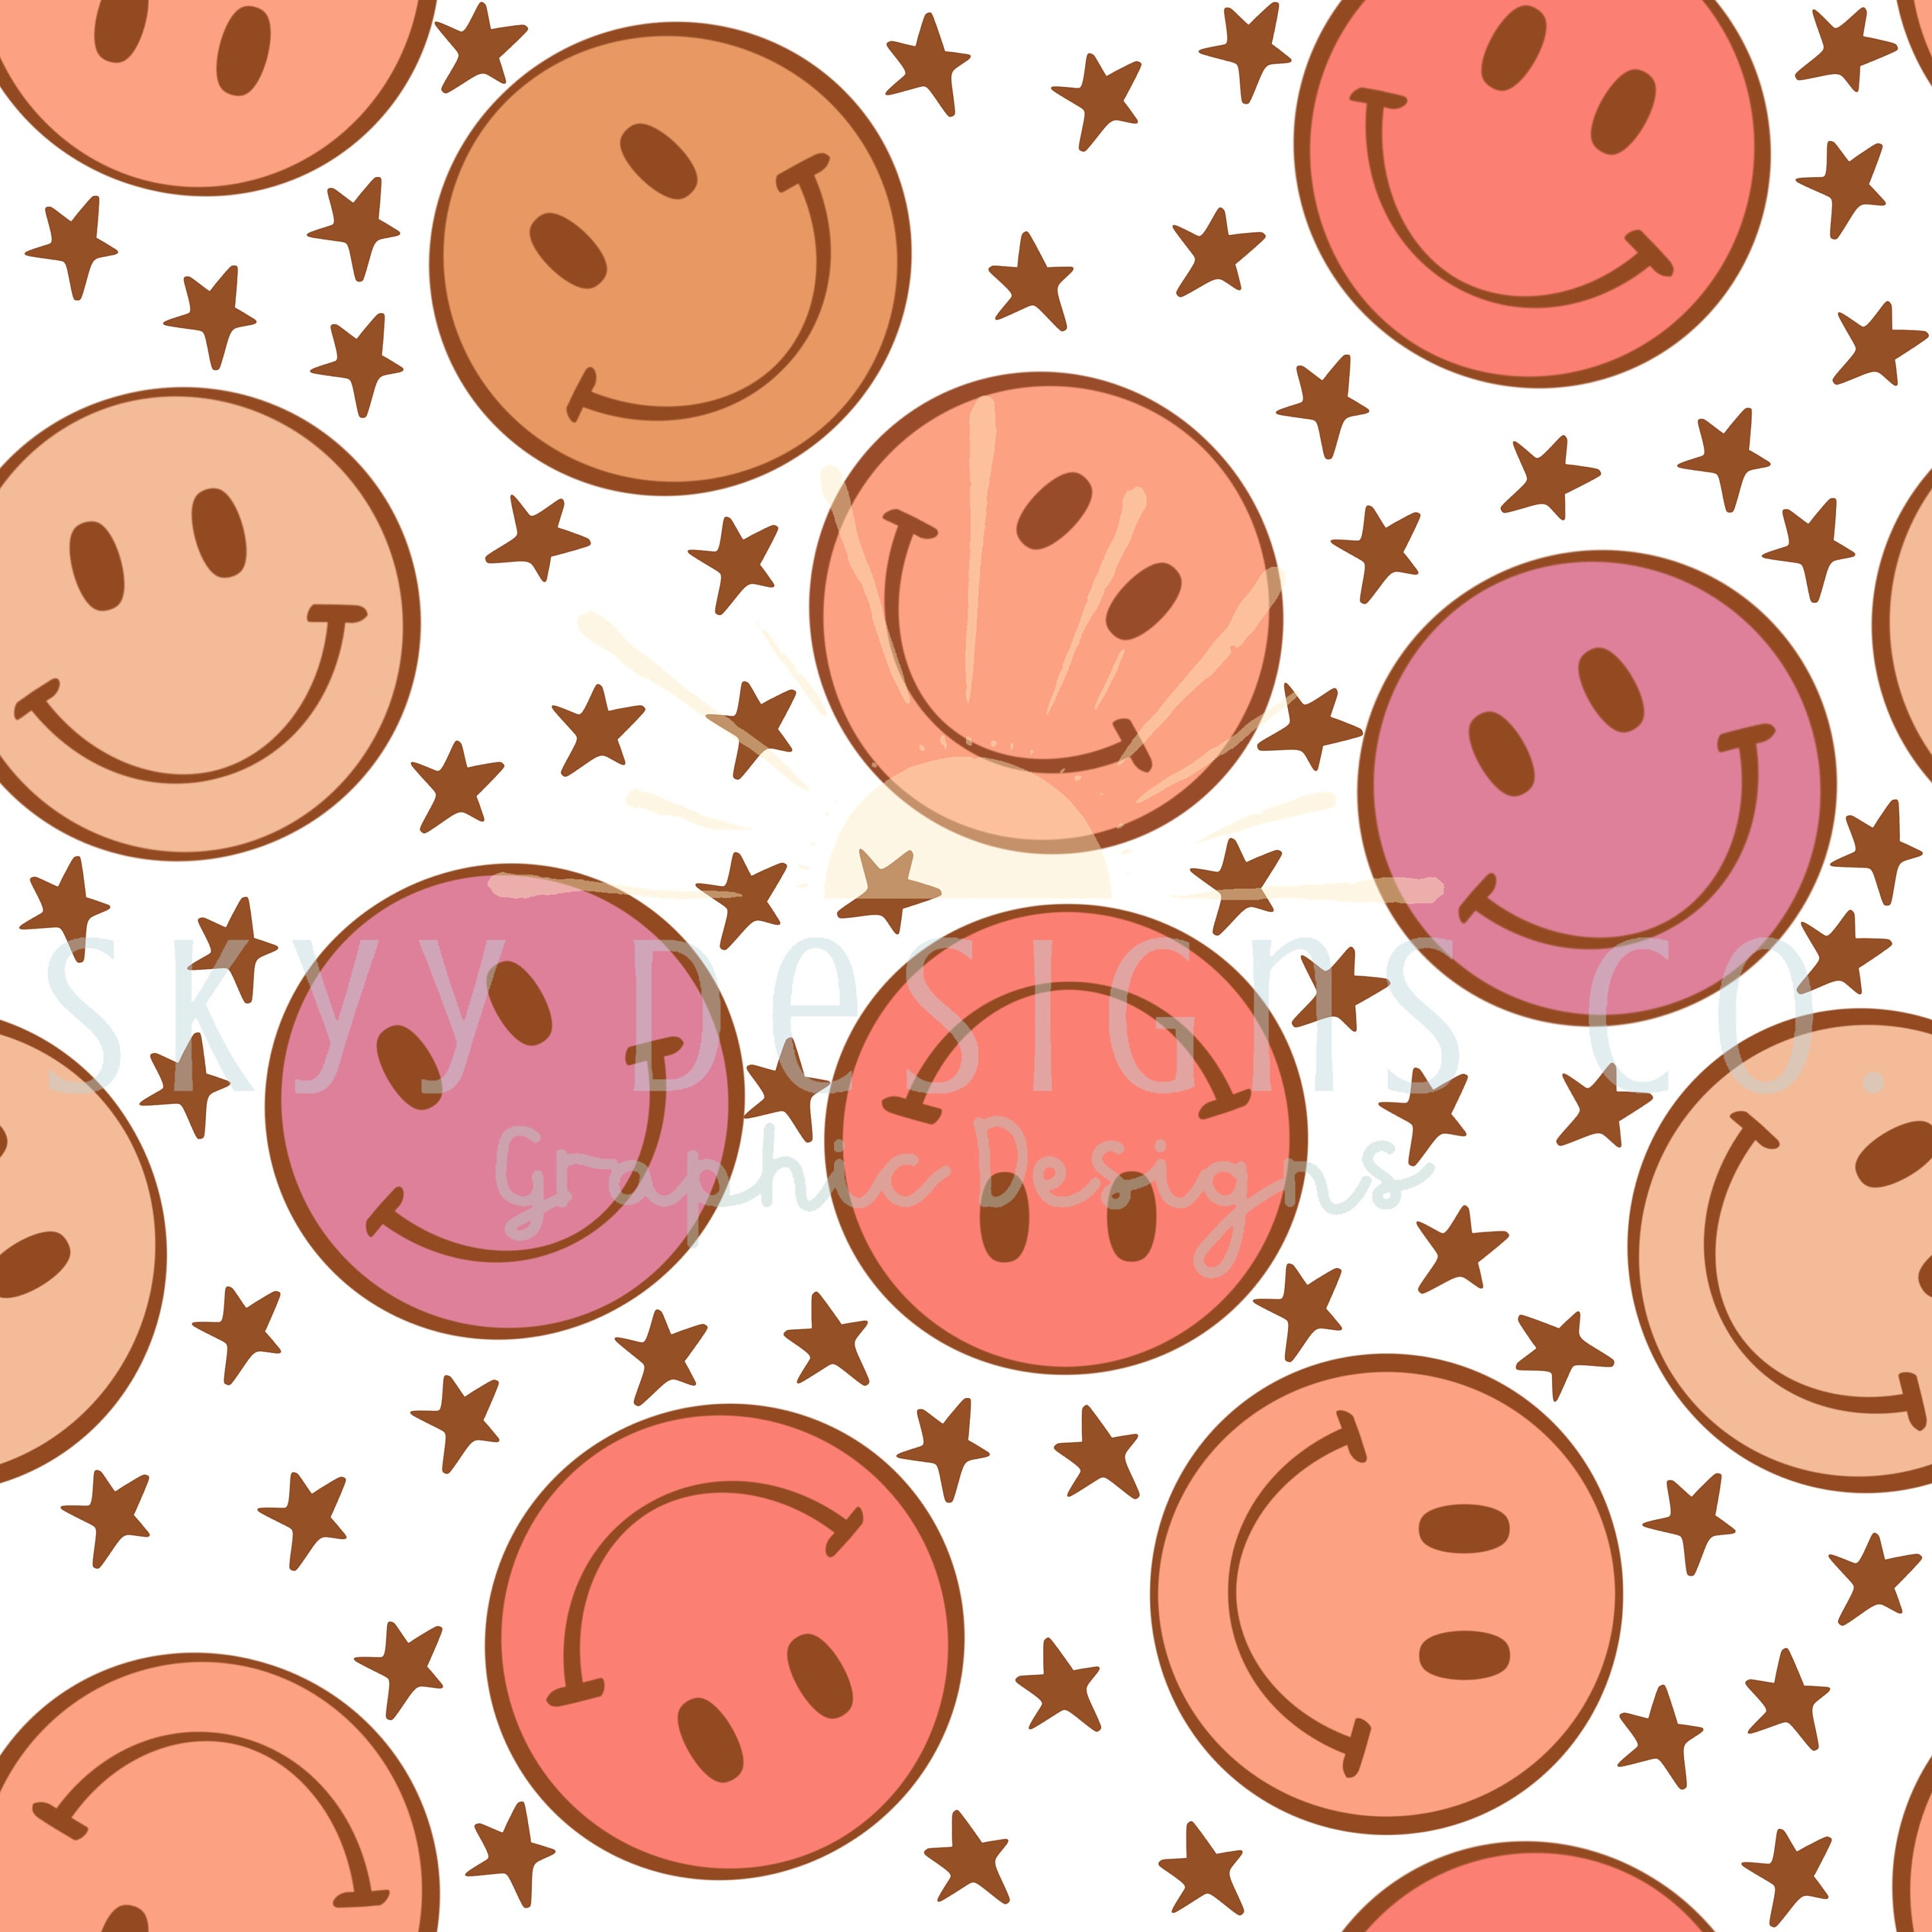 Pink smiley faces digital seamless pattern for fabrics and